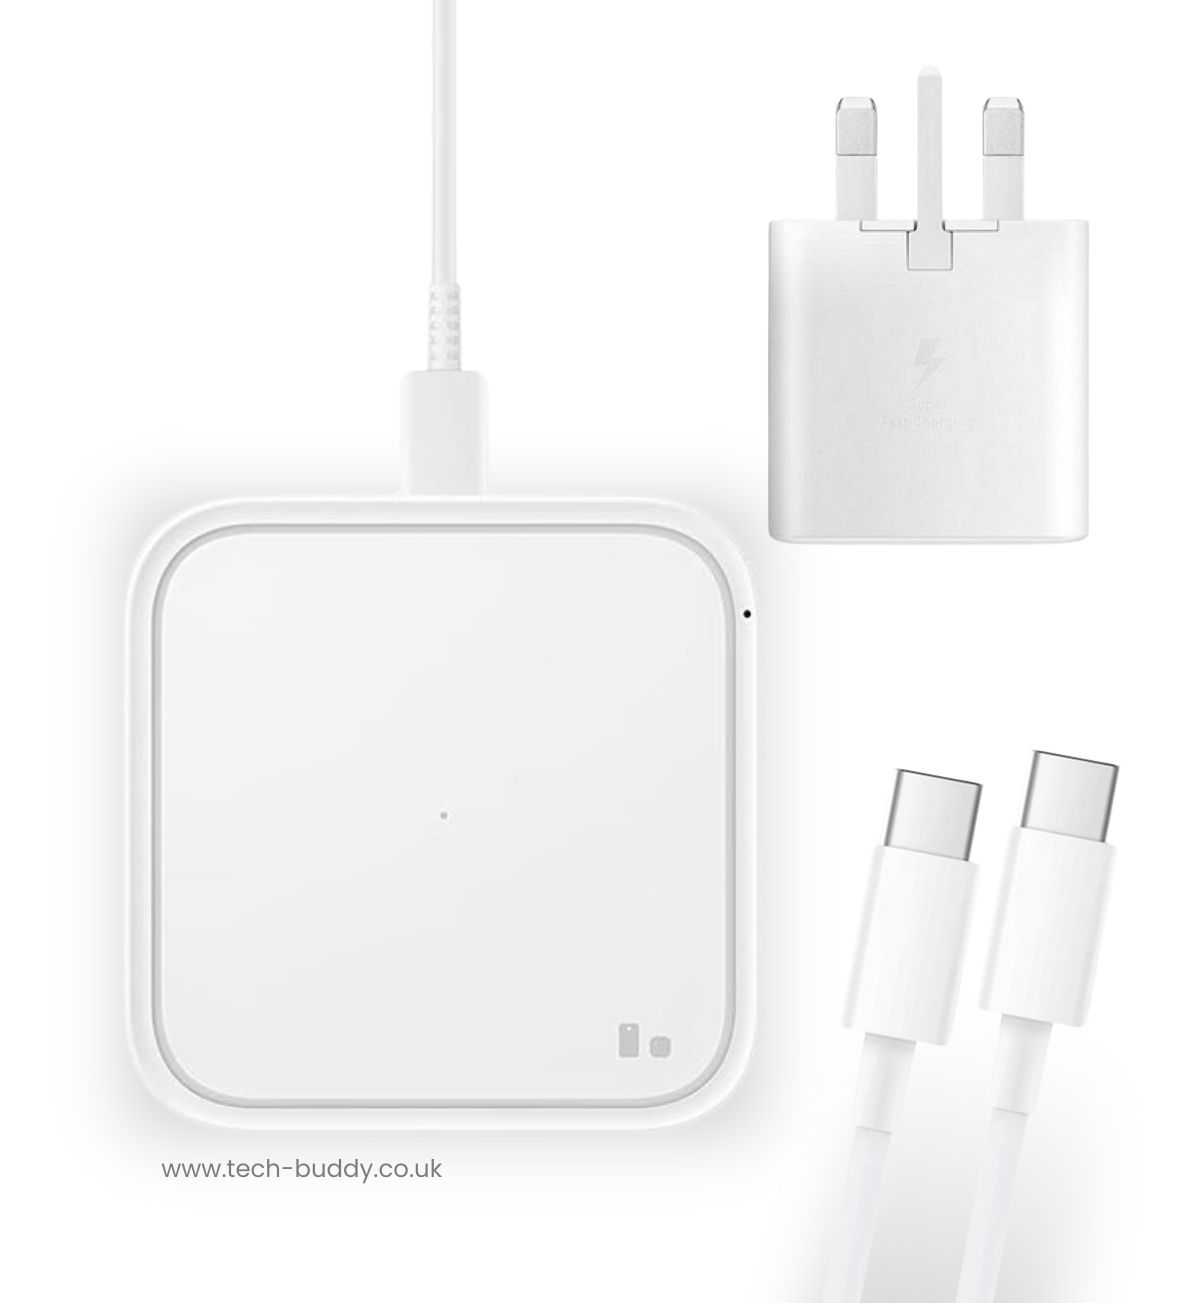 Official Samsung 15W Wireless Charger Kit (UK). Includes wireless charger, USB-C cable (for power), and optional 25W power adapter (for Super Fast Charging on compatible devices). Enjoy fast, cable-free charging for your Qi-enabled devices.